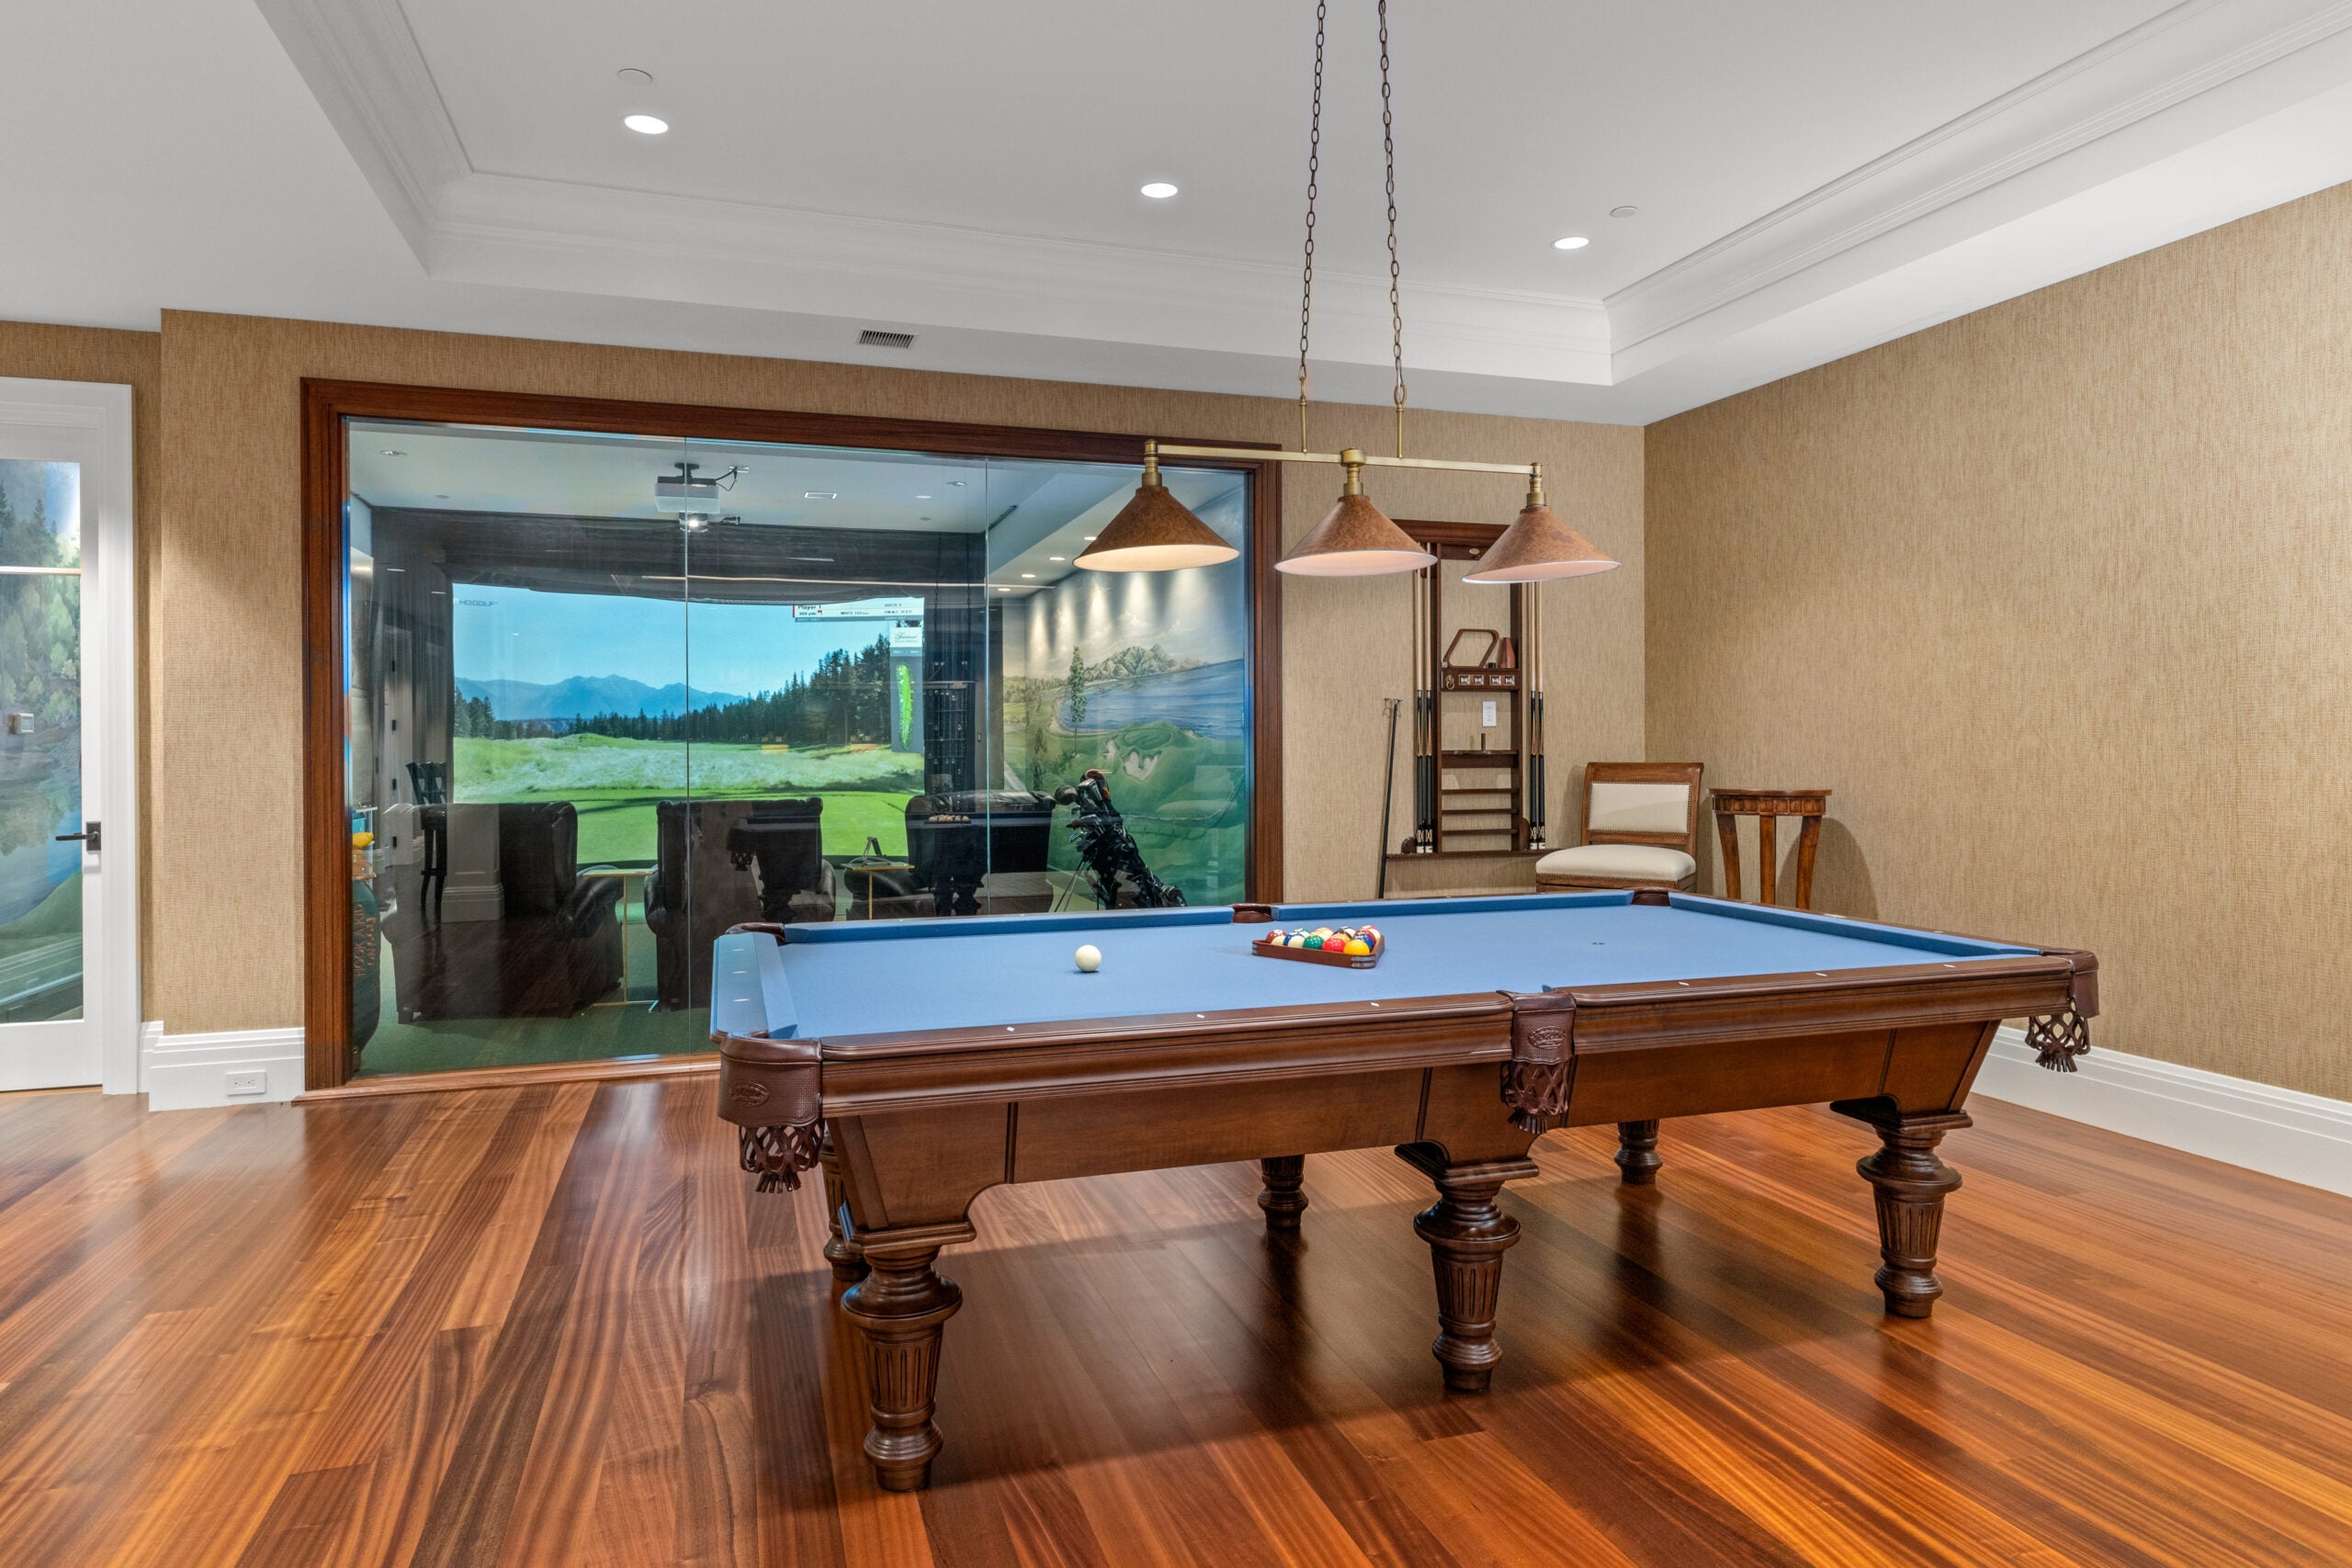 A blue billiards table sits under a bank of three iron-hooded lights. The golf simulation room sits behind glass in the background. The pool table is under a tray ceiling with recessed lighting, and the walls are papered in a sandy-brown glasscloth. The floor is hardwood.